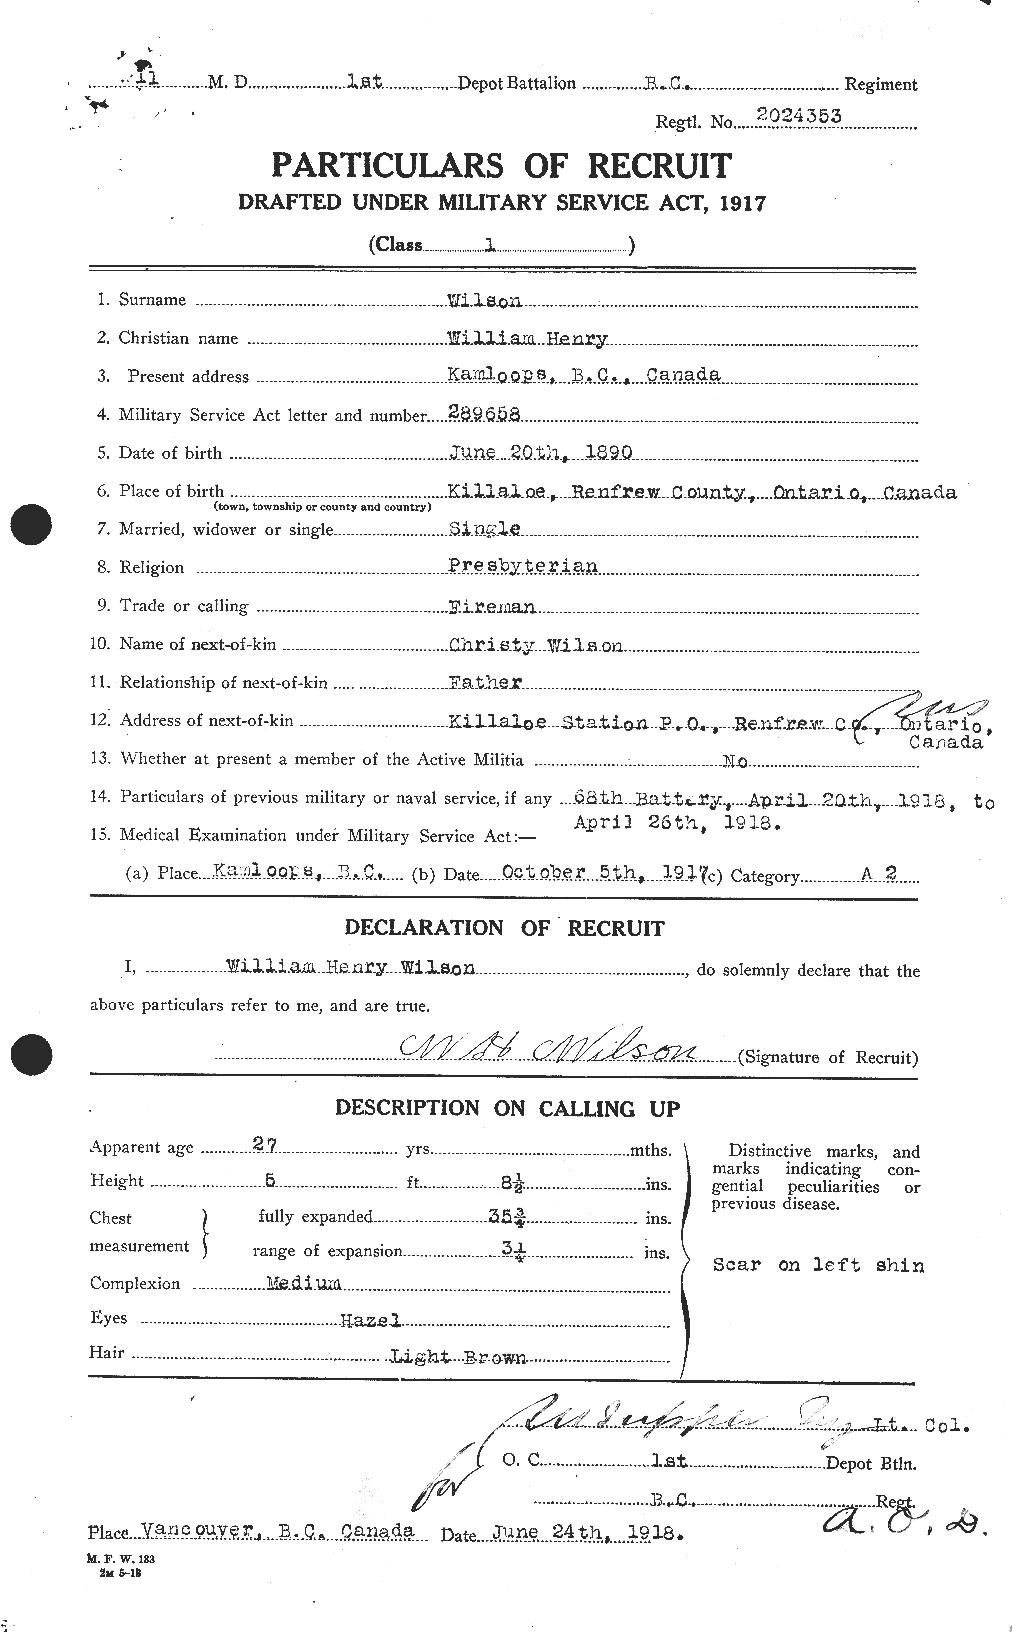 Personnel Records of the First World War - CEF 682032a